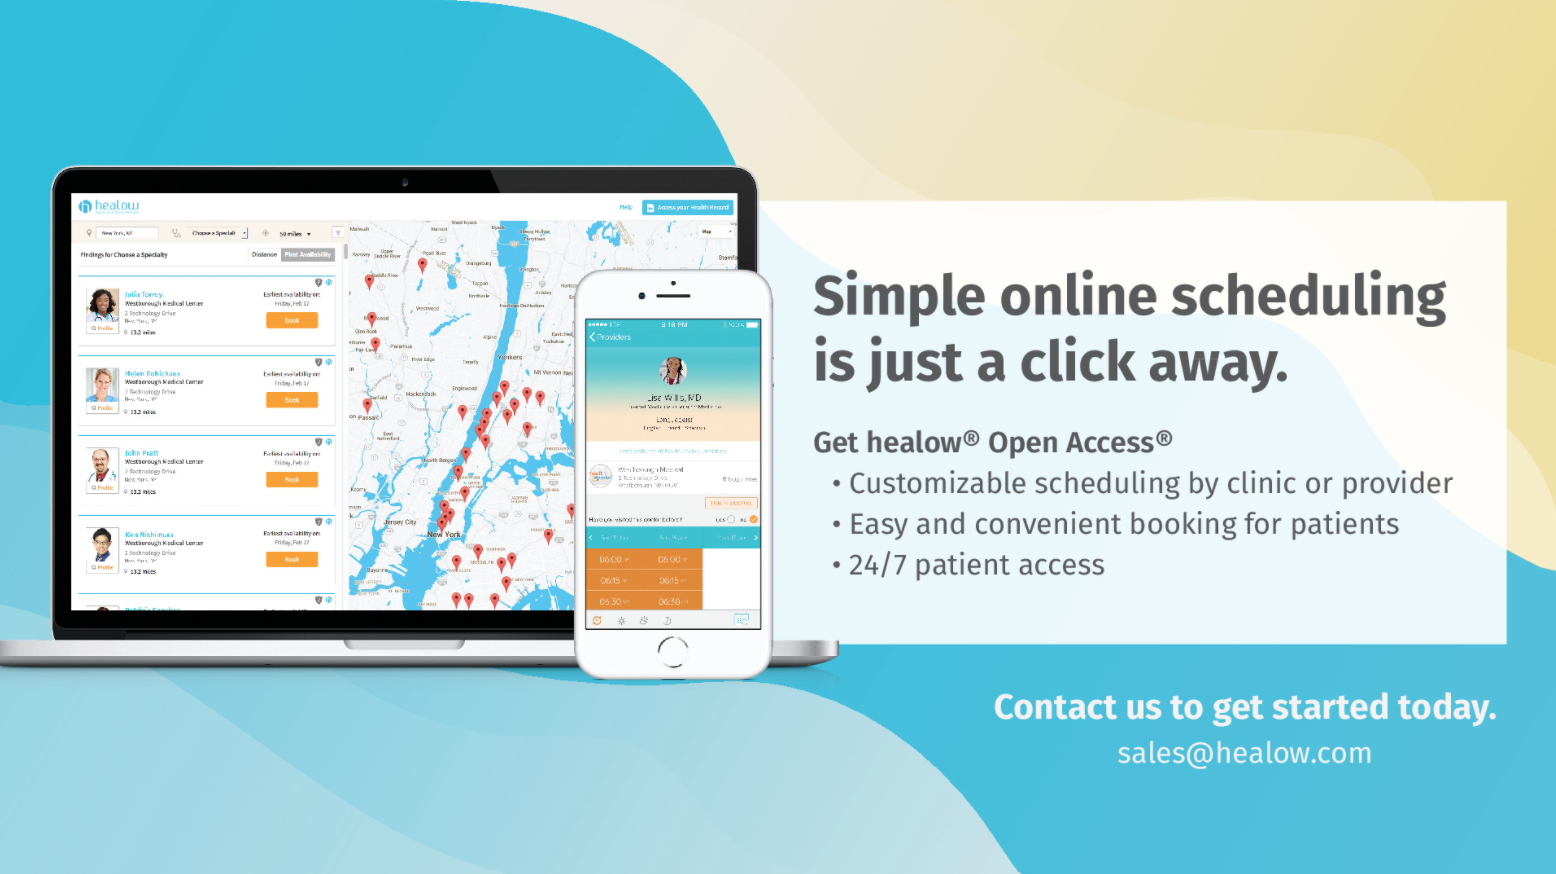 Simple online scheduling is just a click away. get healow® Open Access®. Cusomizable scheduling by clinic or provider. Easy and convenient booking for patients. 24/7 patient access. Contact us to get started today. sales@healow.com